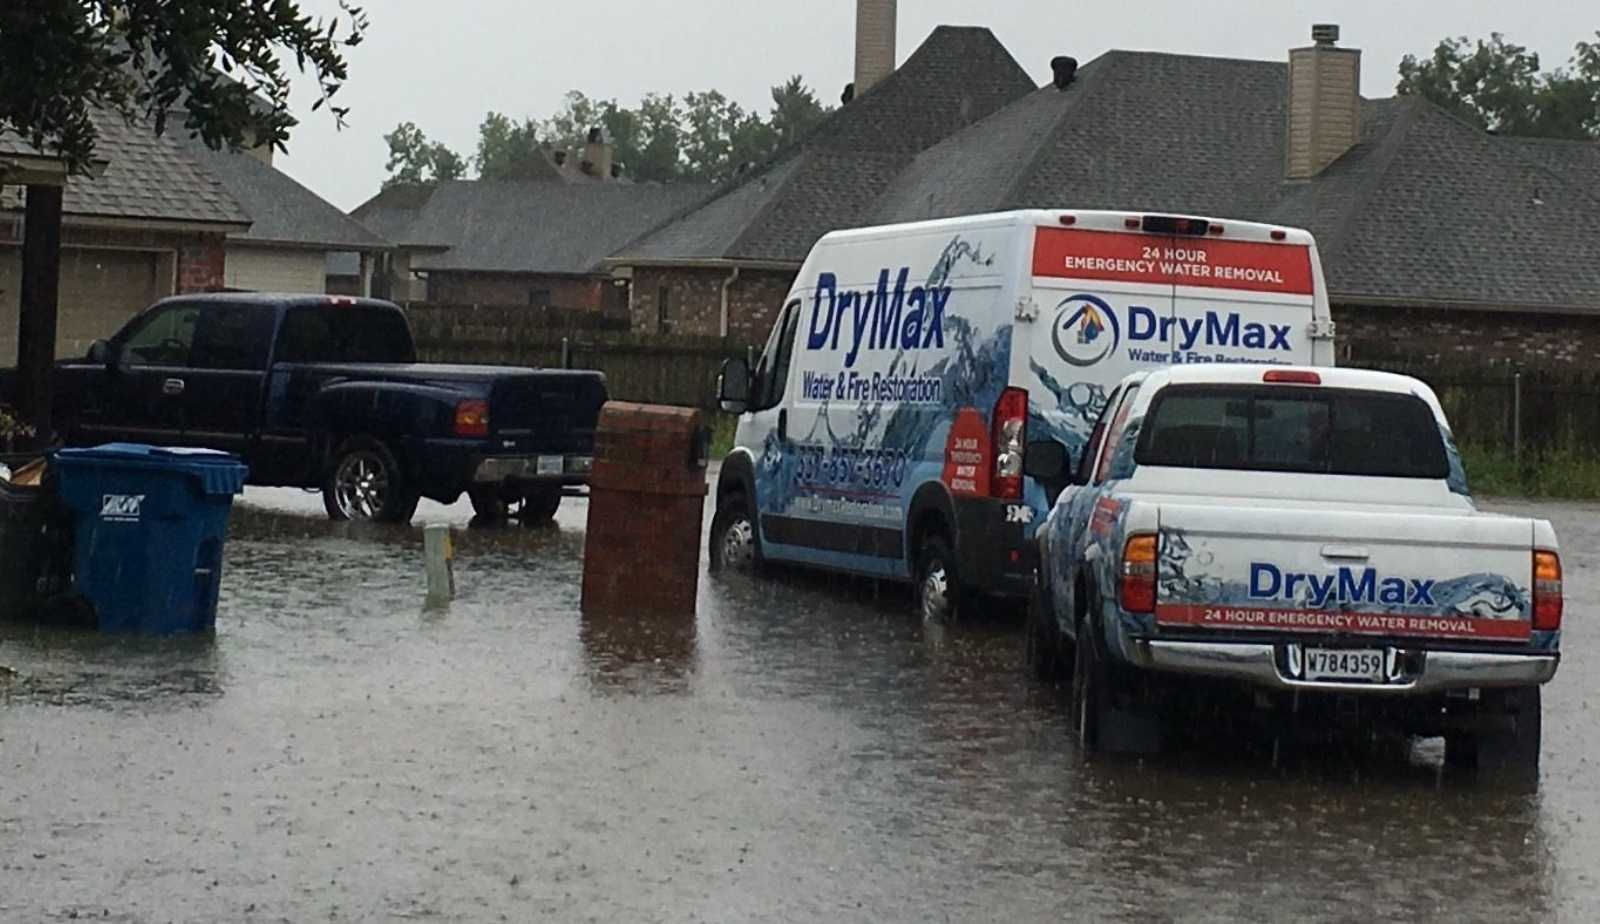 Drymax's Comprehensive Services for Water Damage Restoration